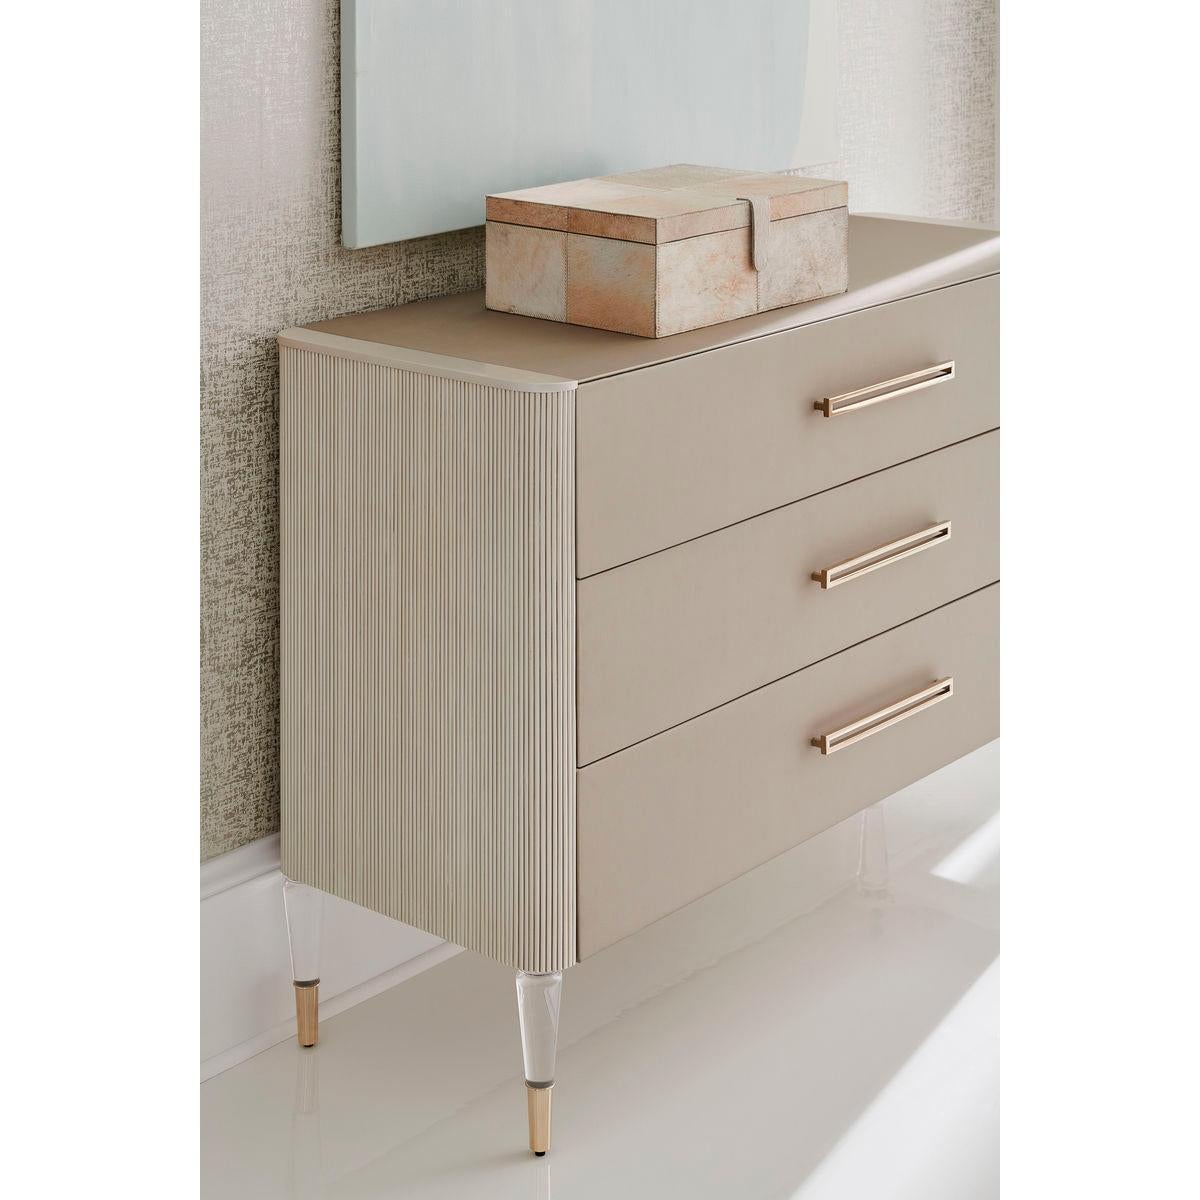 Unforgettable from every perspective, this stylish chest will woo you at first sight. With an inspired mix of materials. Its unique fluted sides and textured vinyl drawer fronts (and top) are brought to life in shades of Whisper of Gold and Matte